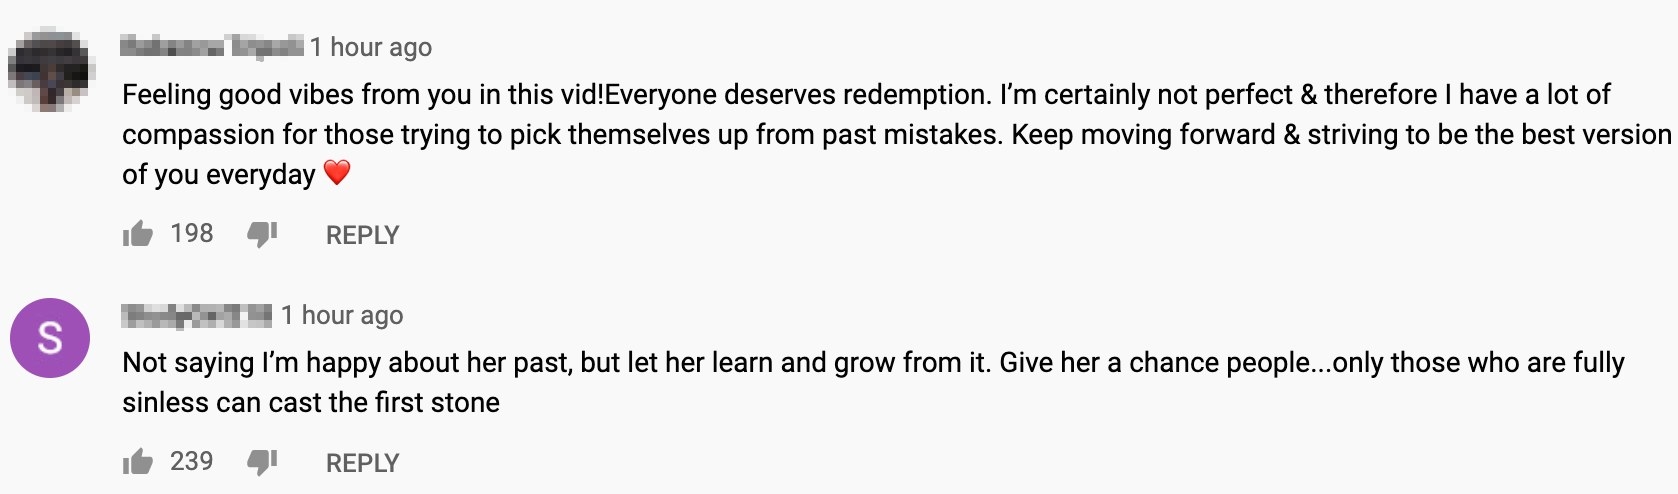 Comments saying everyone deserves redemption and the ability to learn from their mistakes